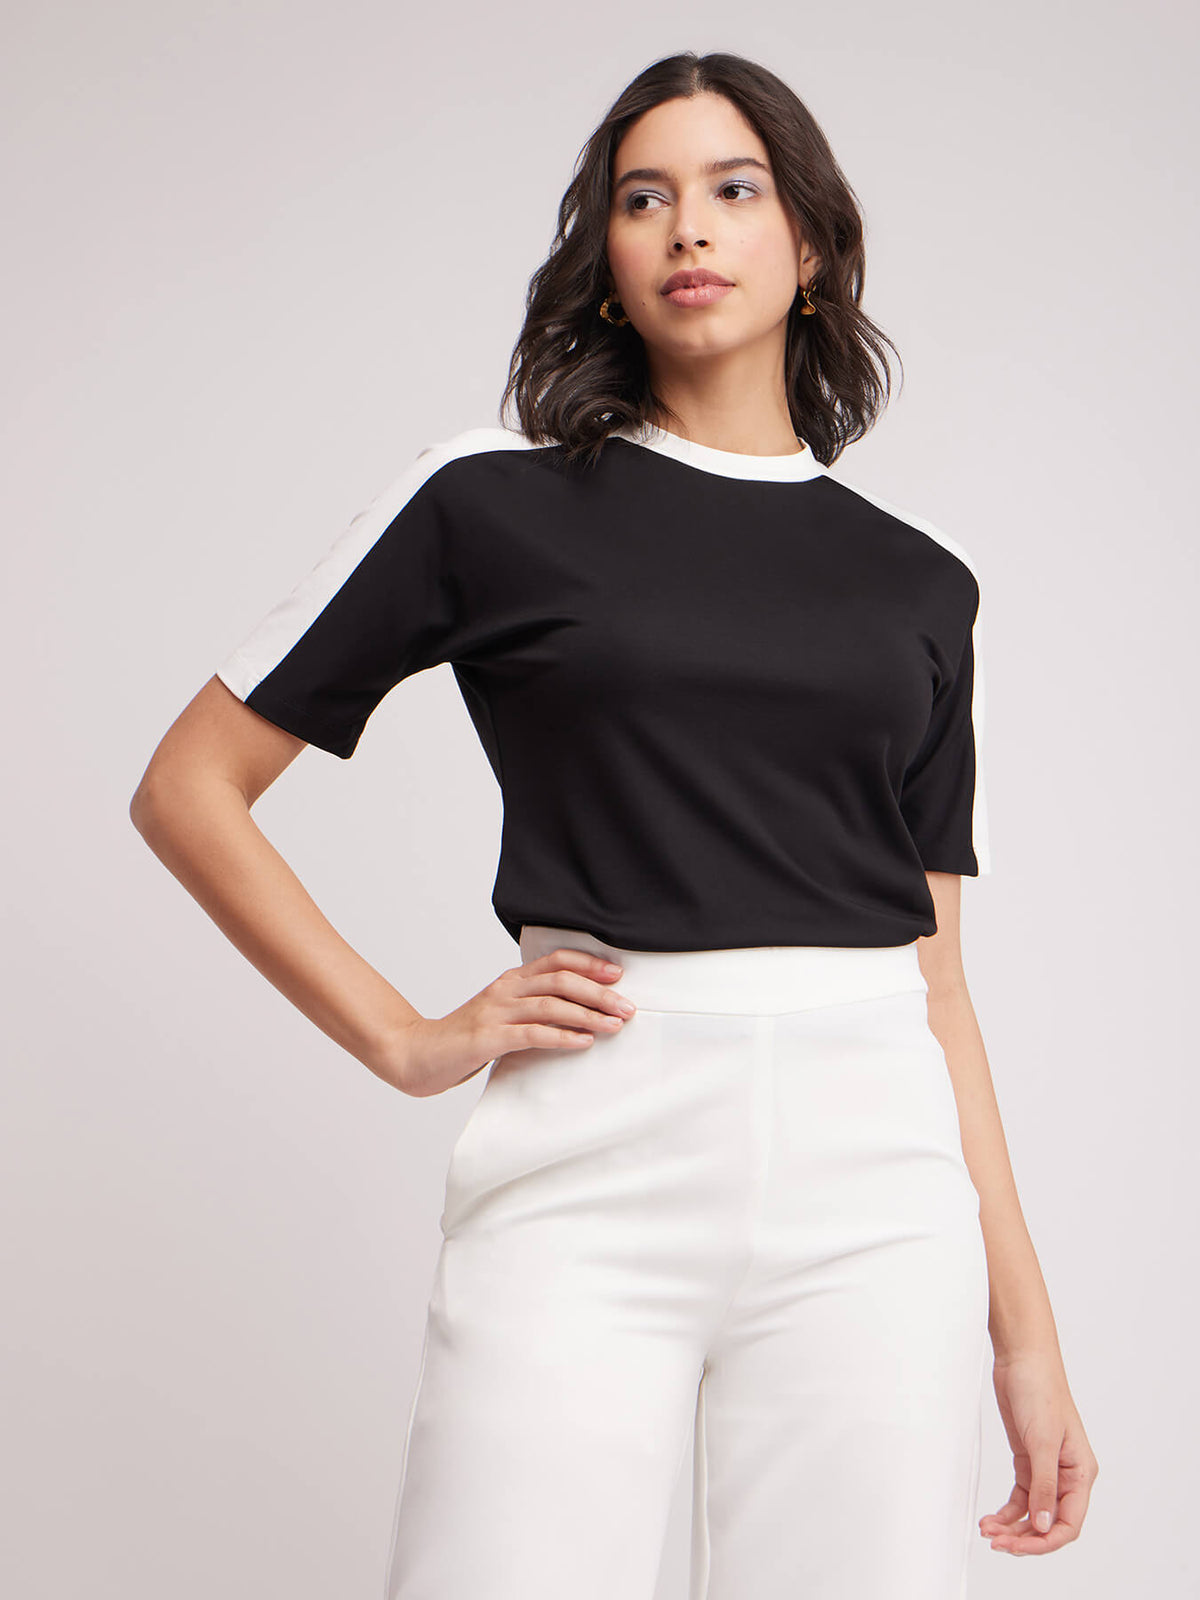 Colour Block Half Sleeves Top - Black And White